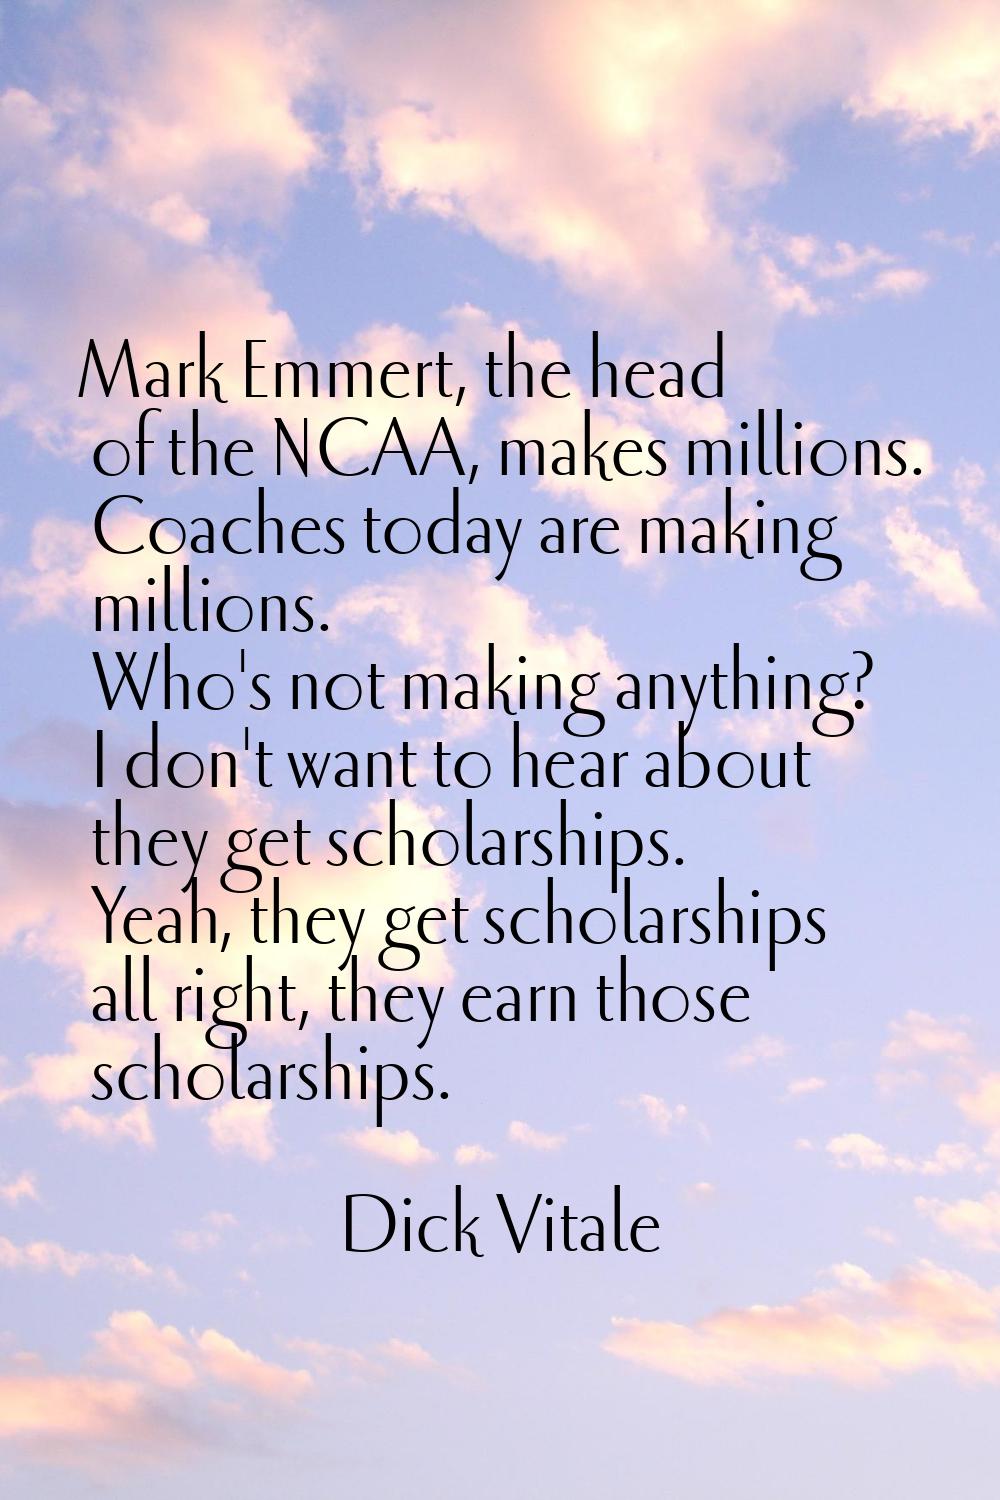 Mark Emmert, the head of the NCAA, makes millions. Coaches today are making millions. Who's not mak